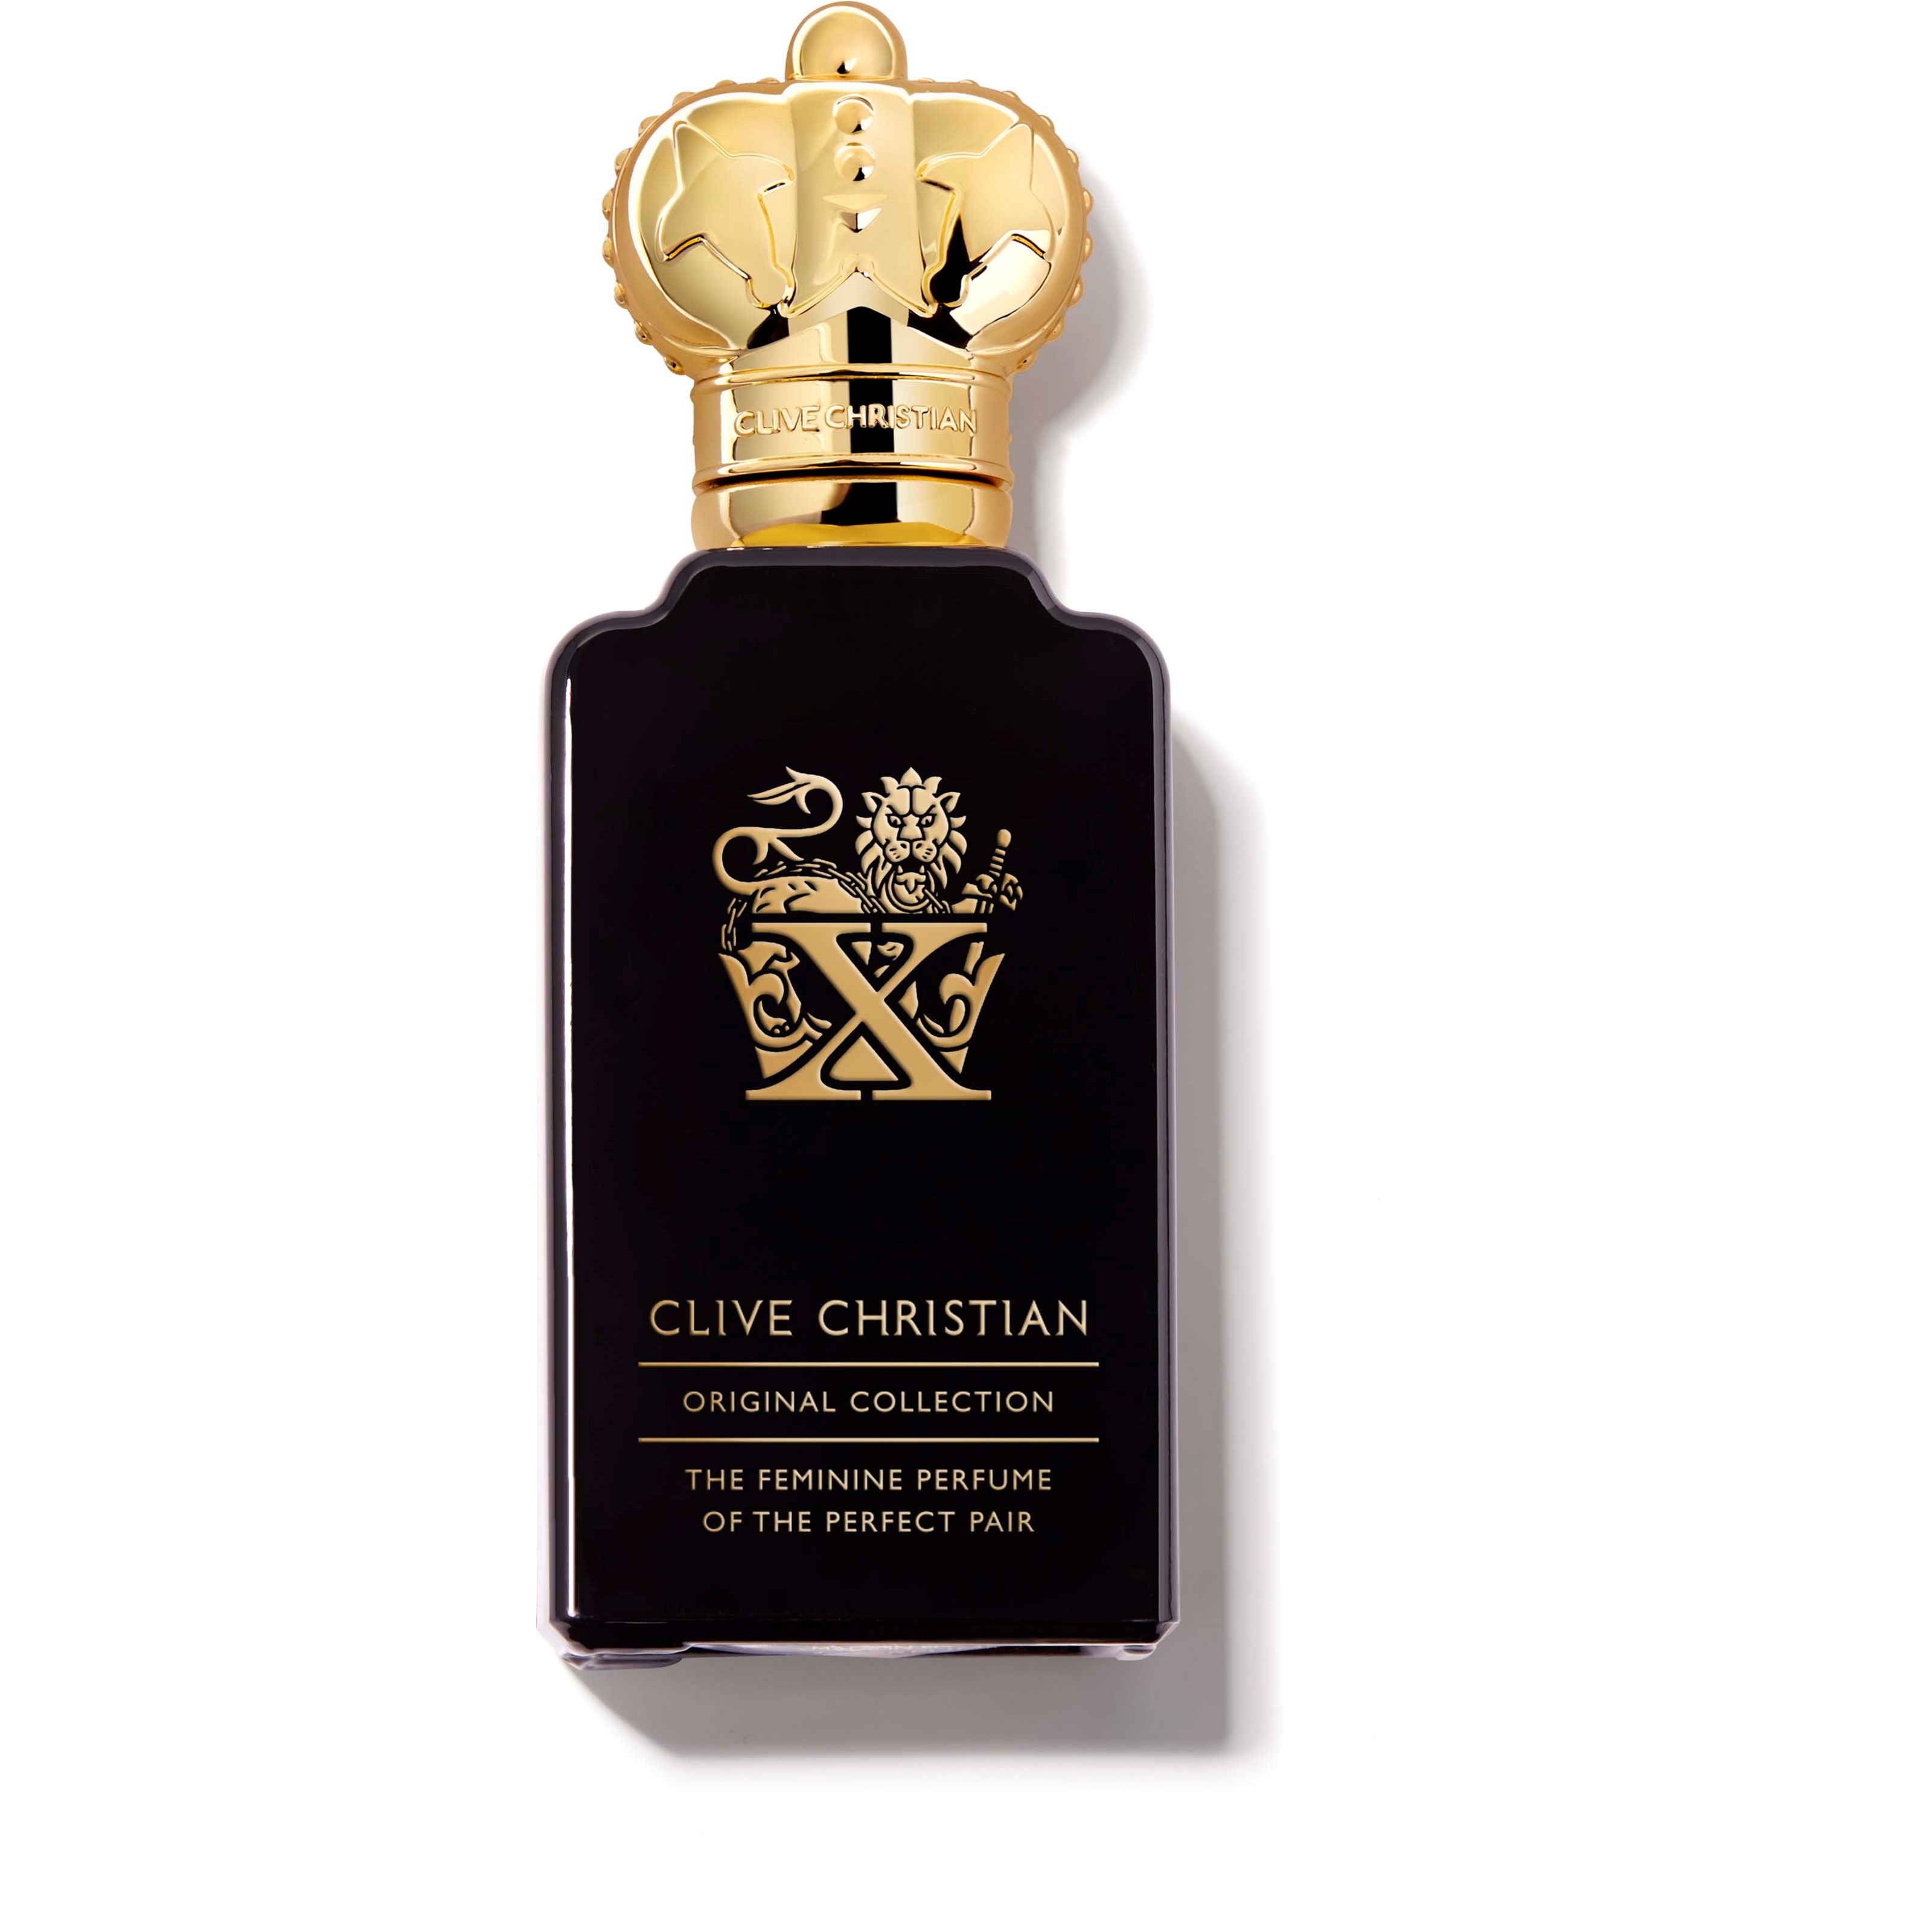 Clive Christian Original Collection X The Feminine Perfume Of The